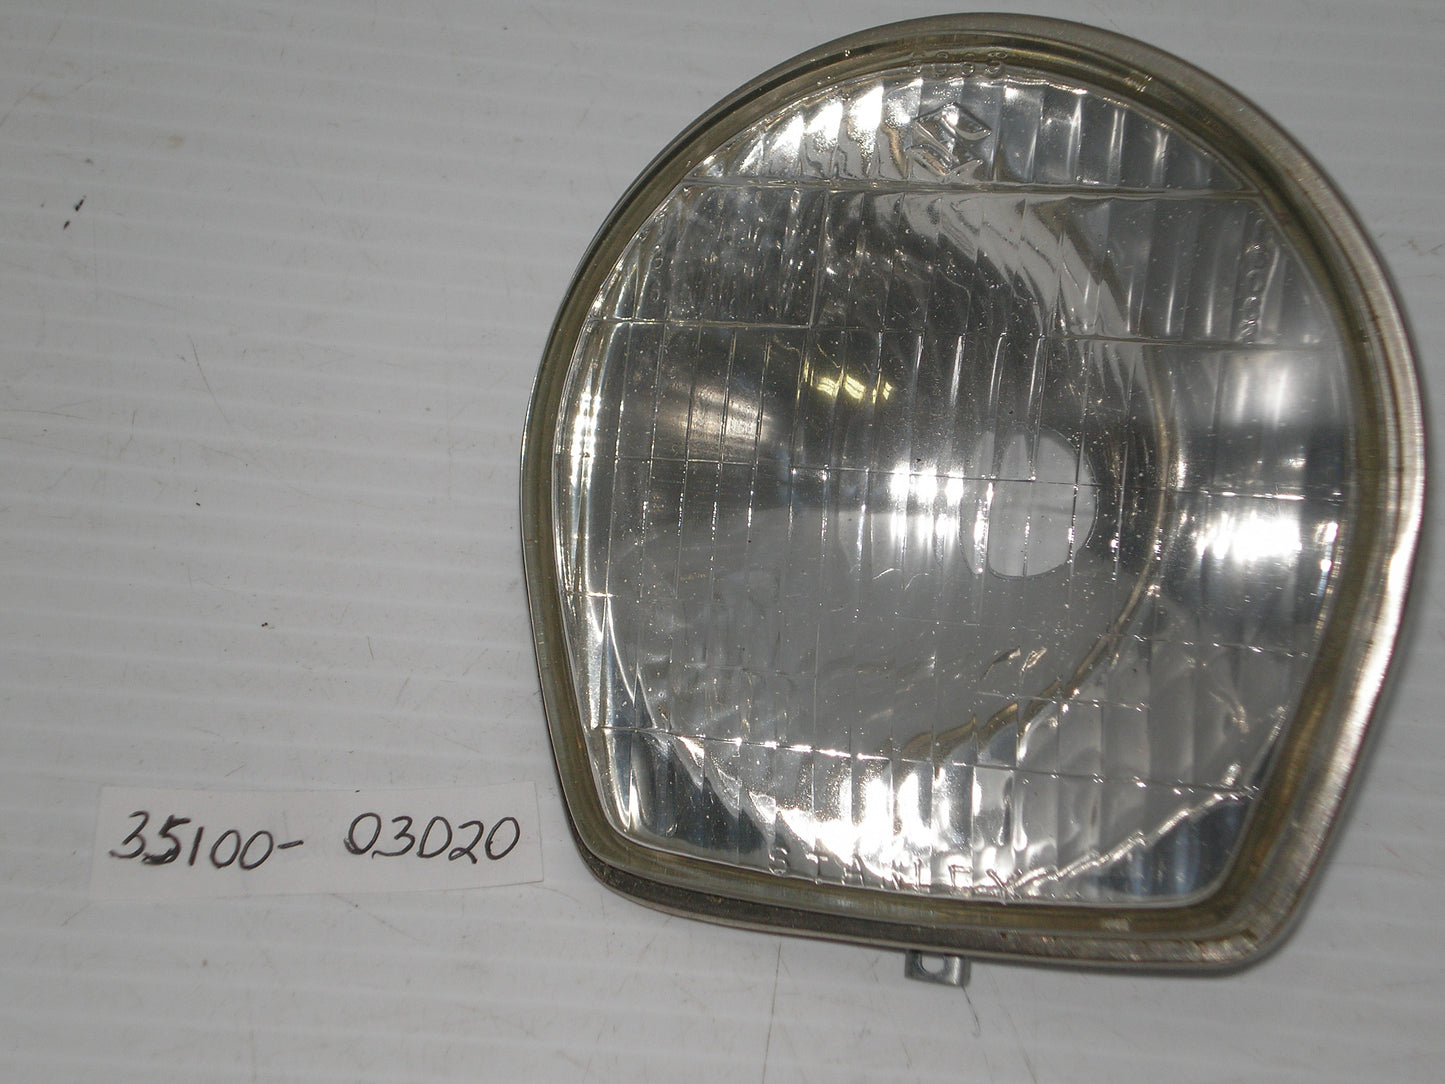 SUZUKI   motorcycle moped or scooter Headlight Lens Unit  35100-03020